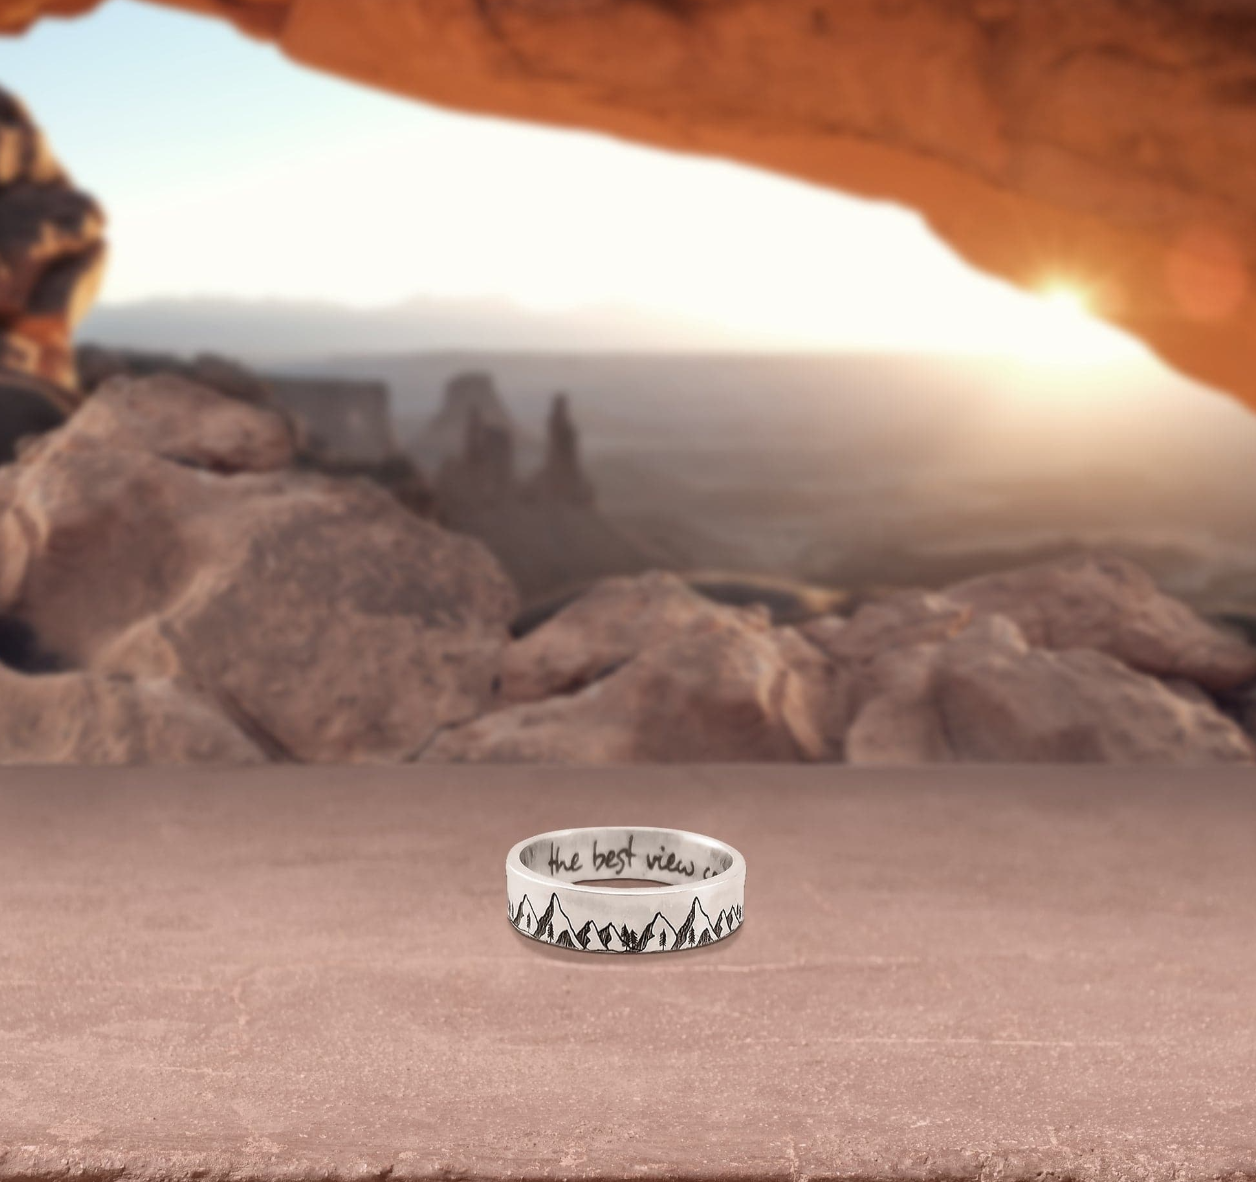 "The Best Views Come From The Toughest Climbs" Ring